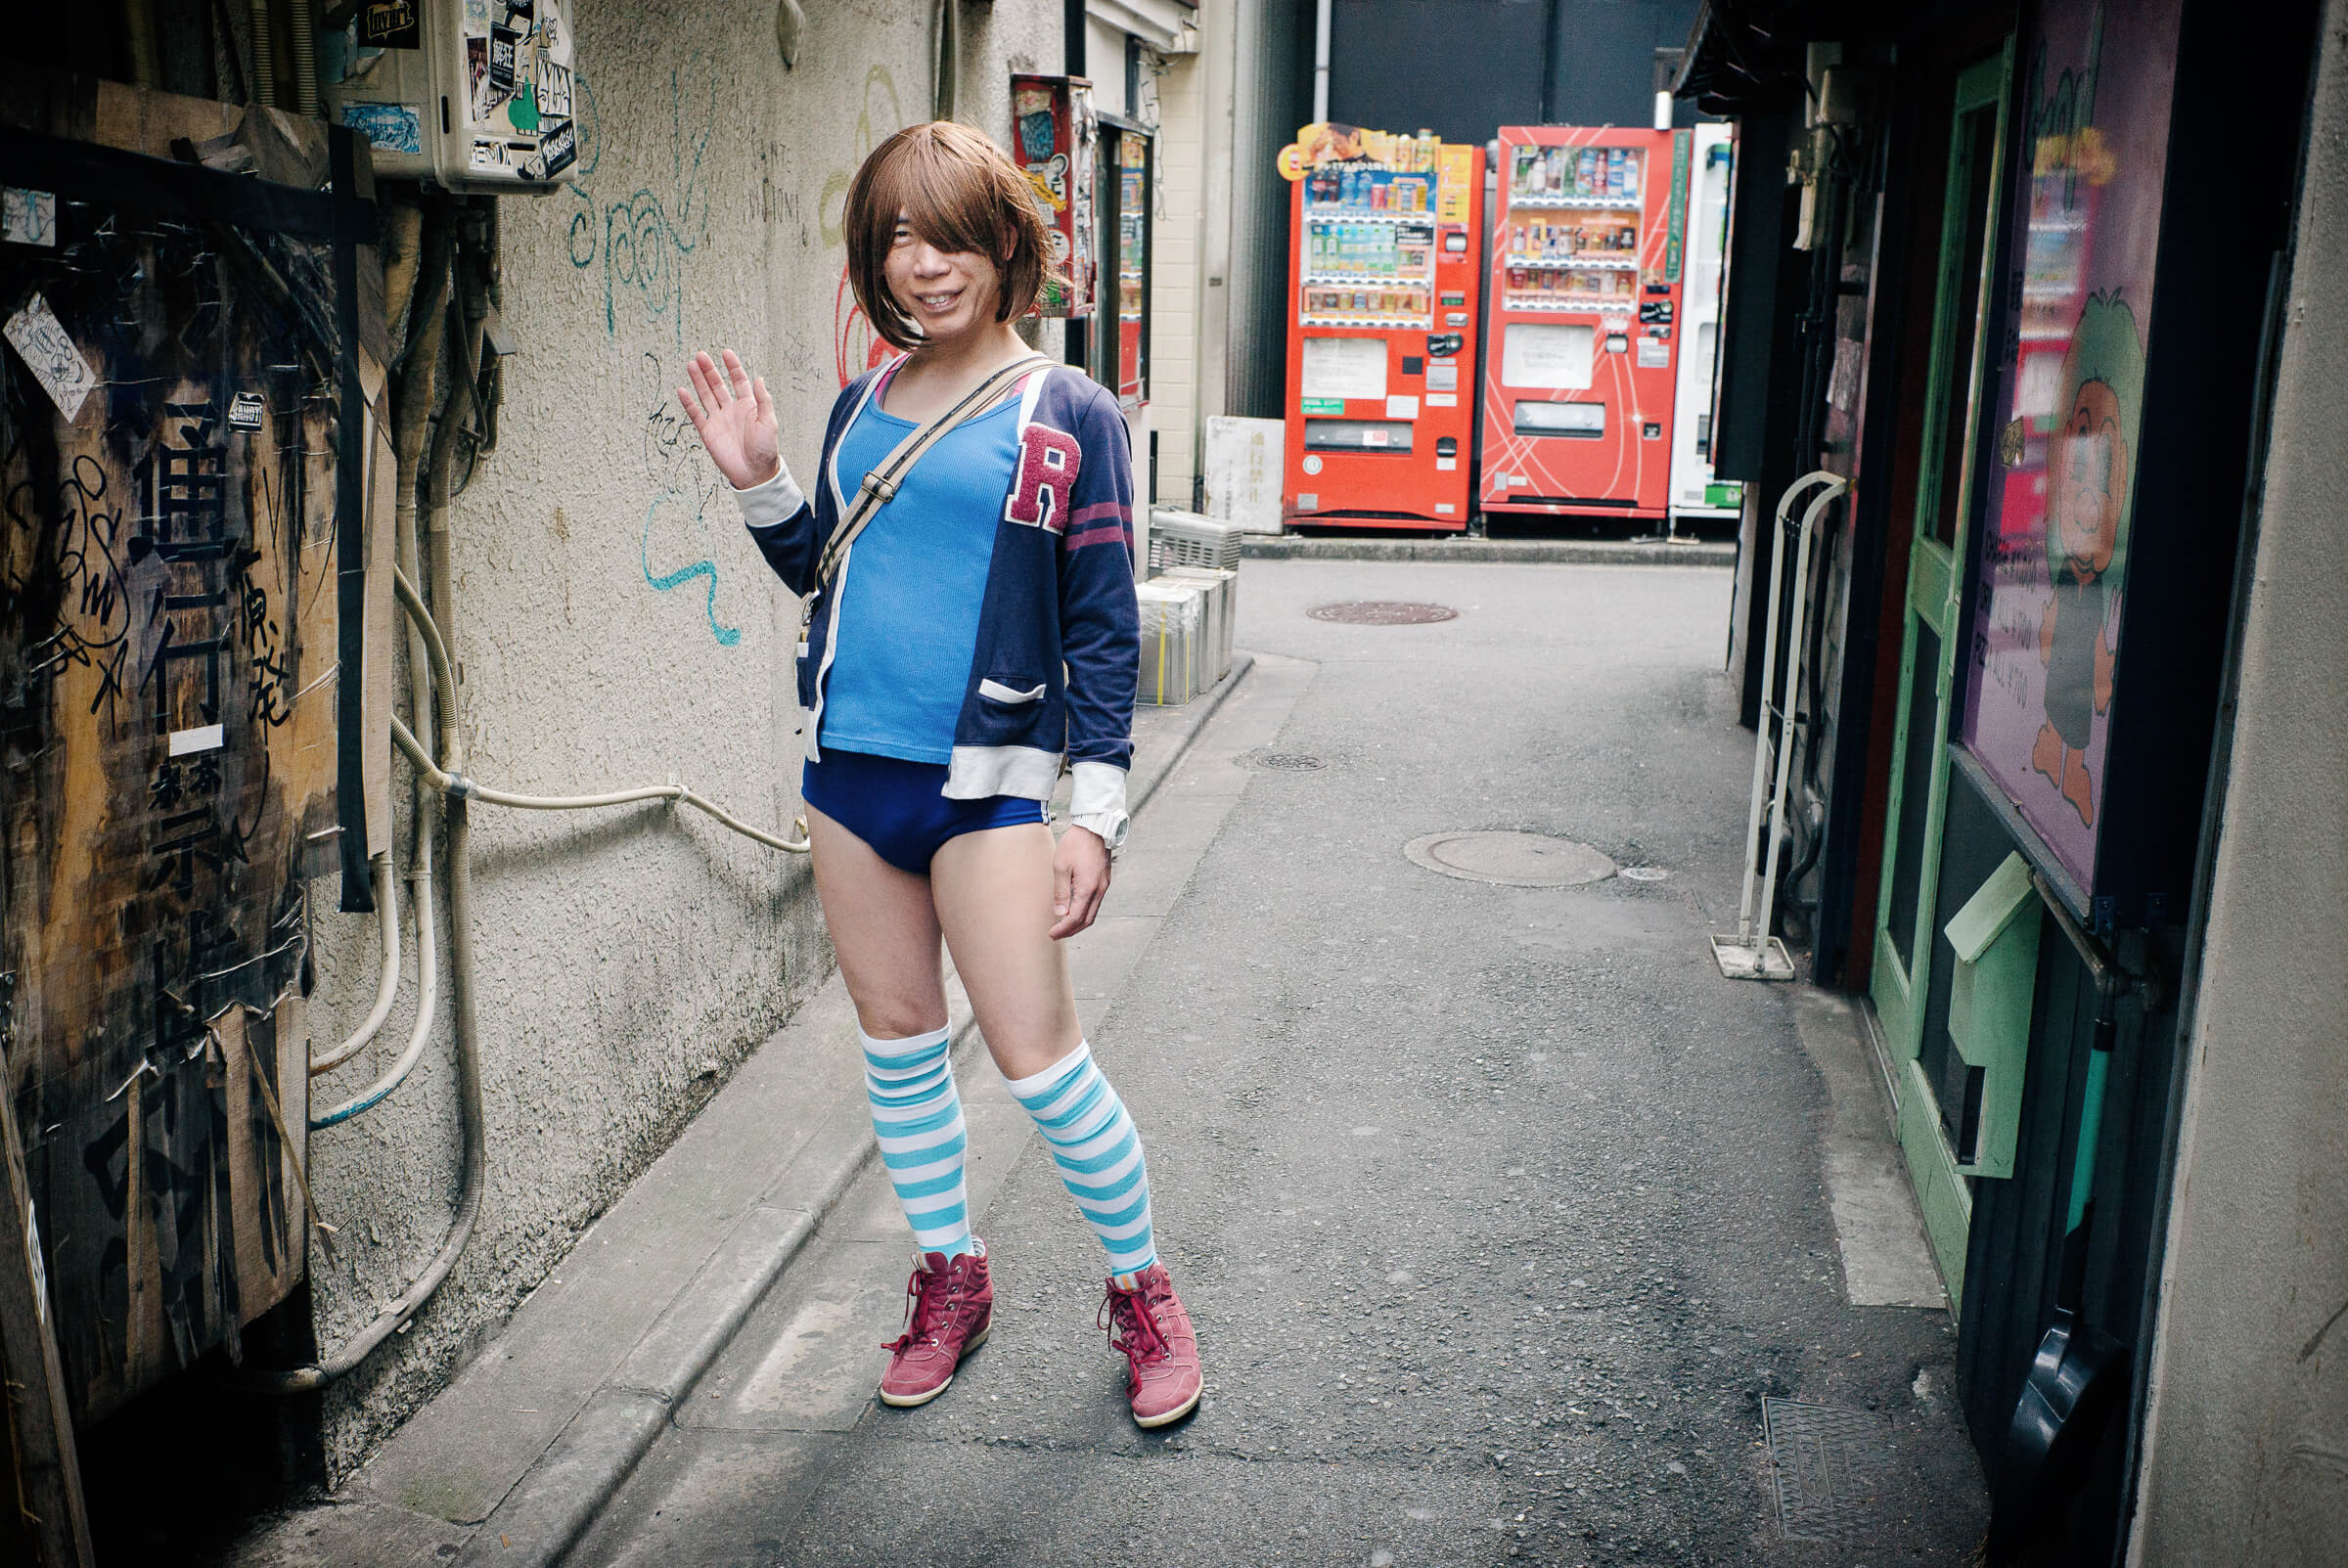 A Man Wearing Schoolgirl Gym Shorts In A Tokyo Alley — Tokyo Times 